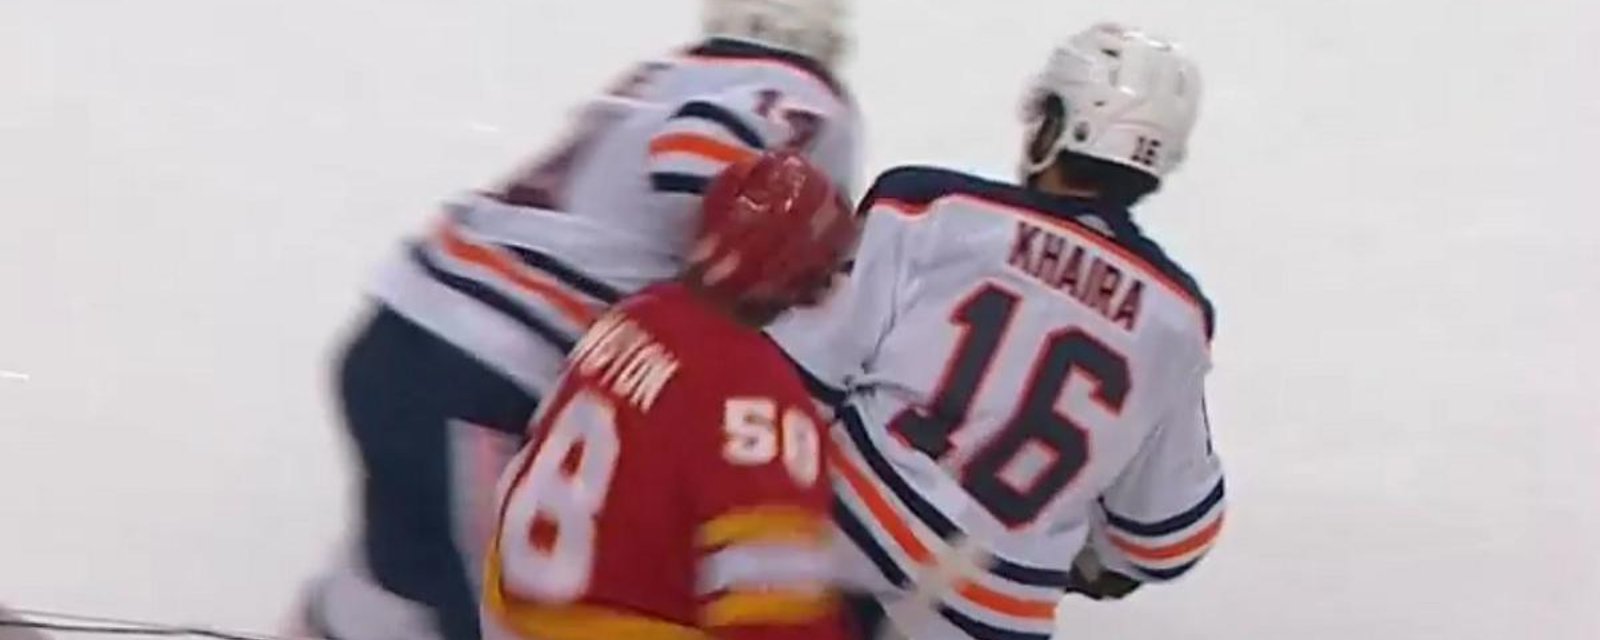 Jujhar Khaira takes out Oliver Kylington with a big hit to the head.